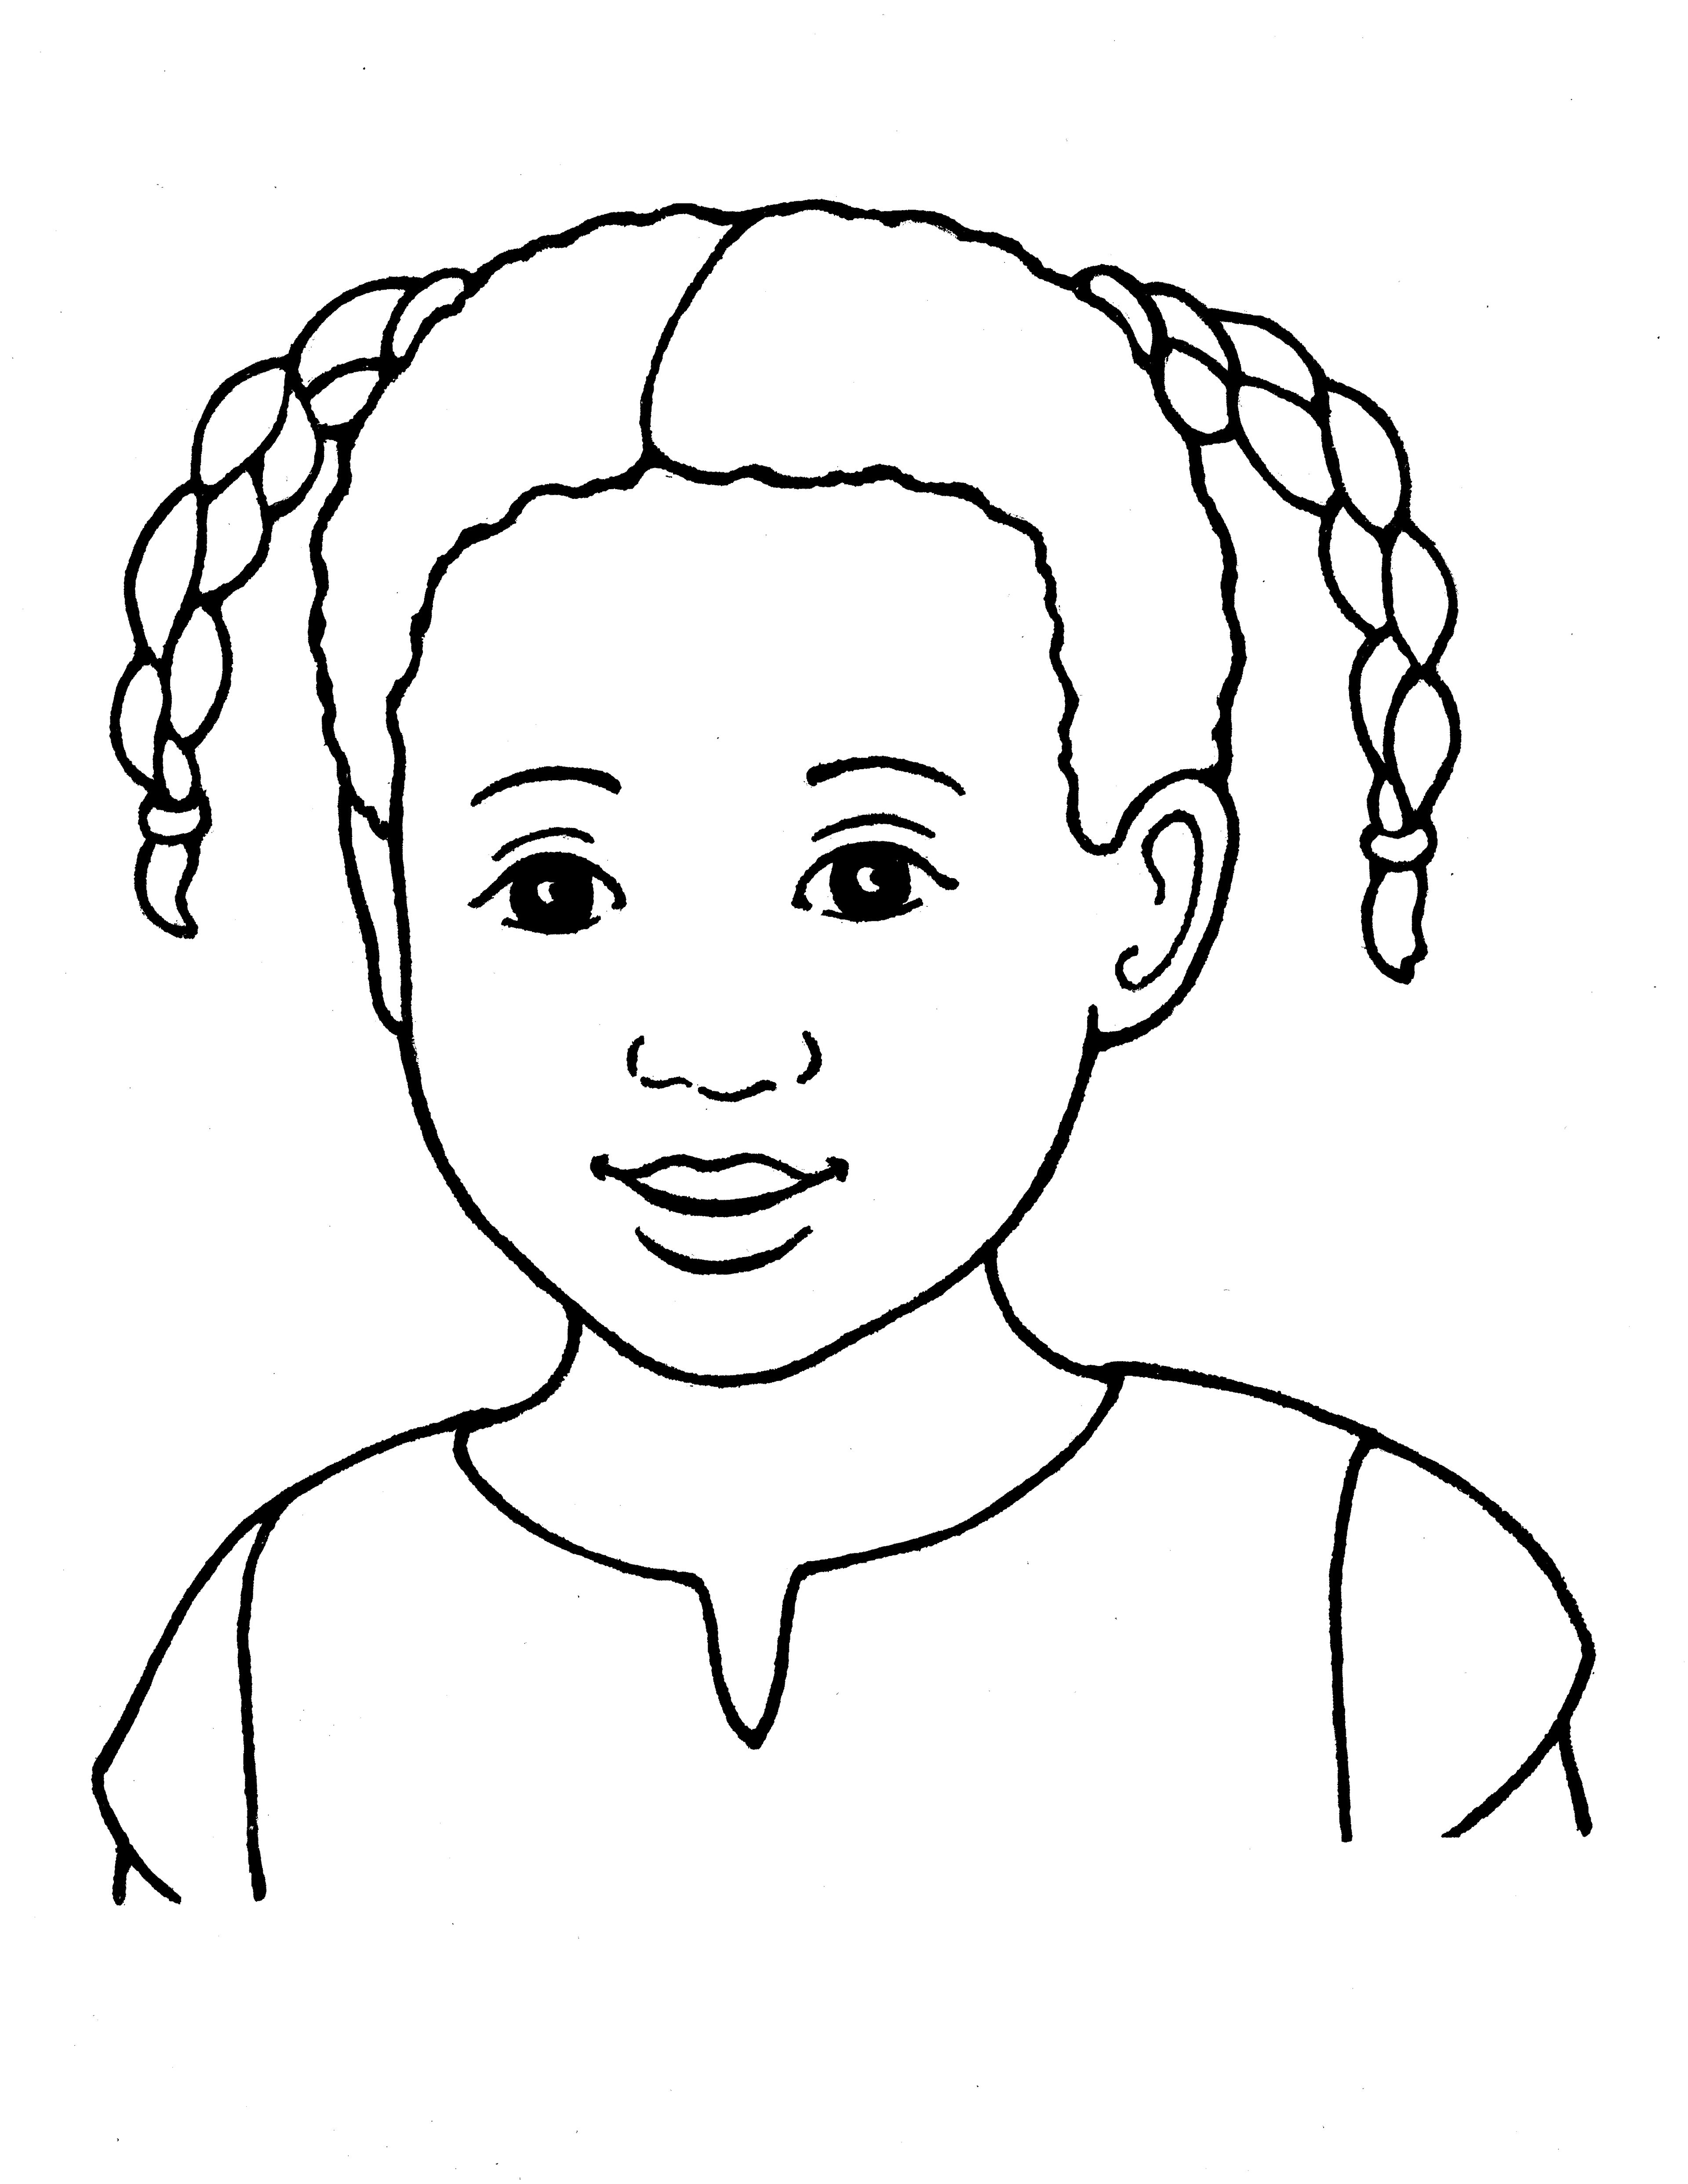 A line drawing of a Primary girl with braided pigtails and brown eyes.